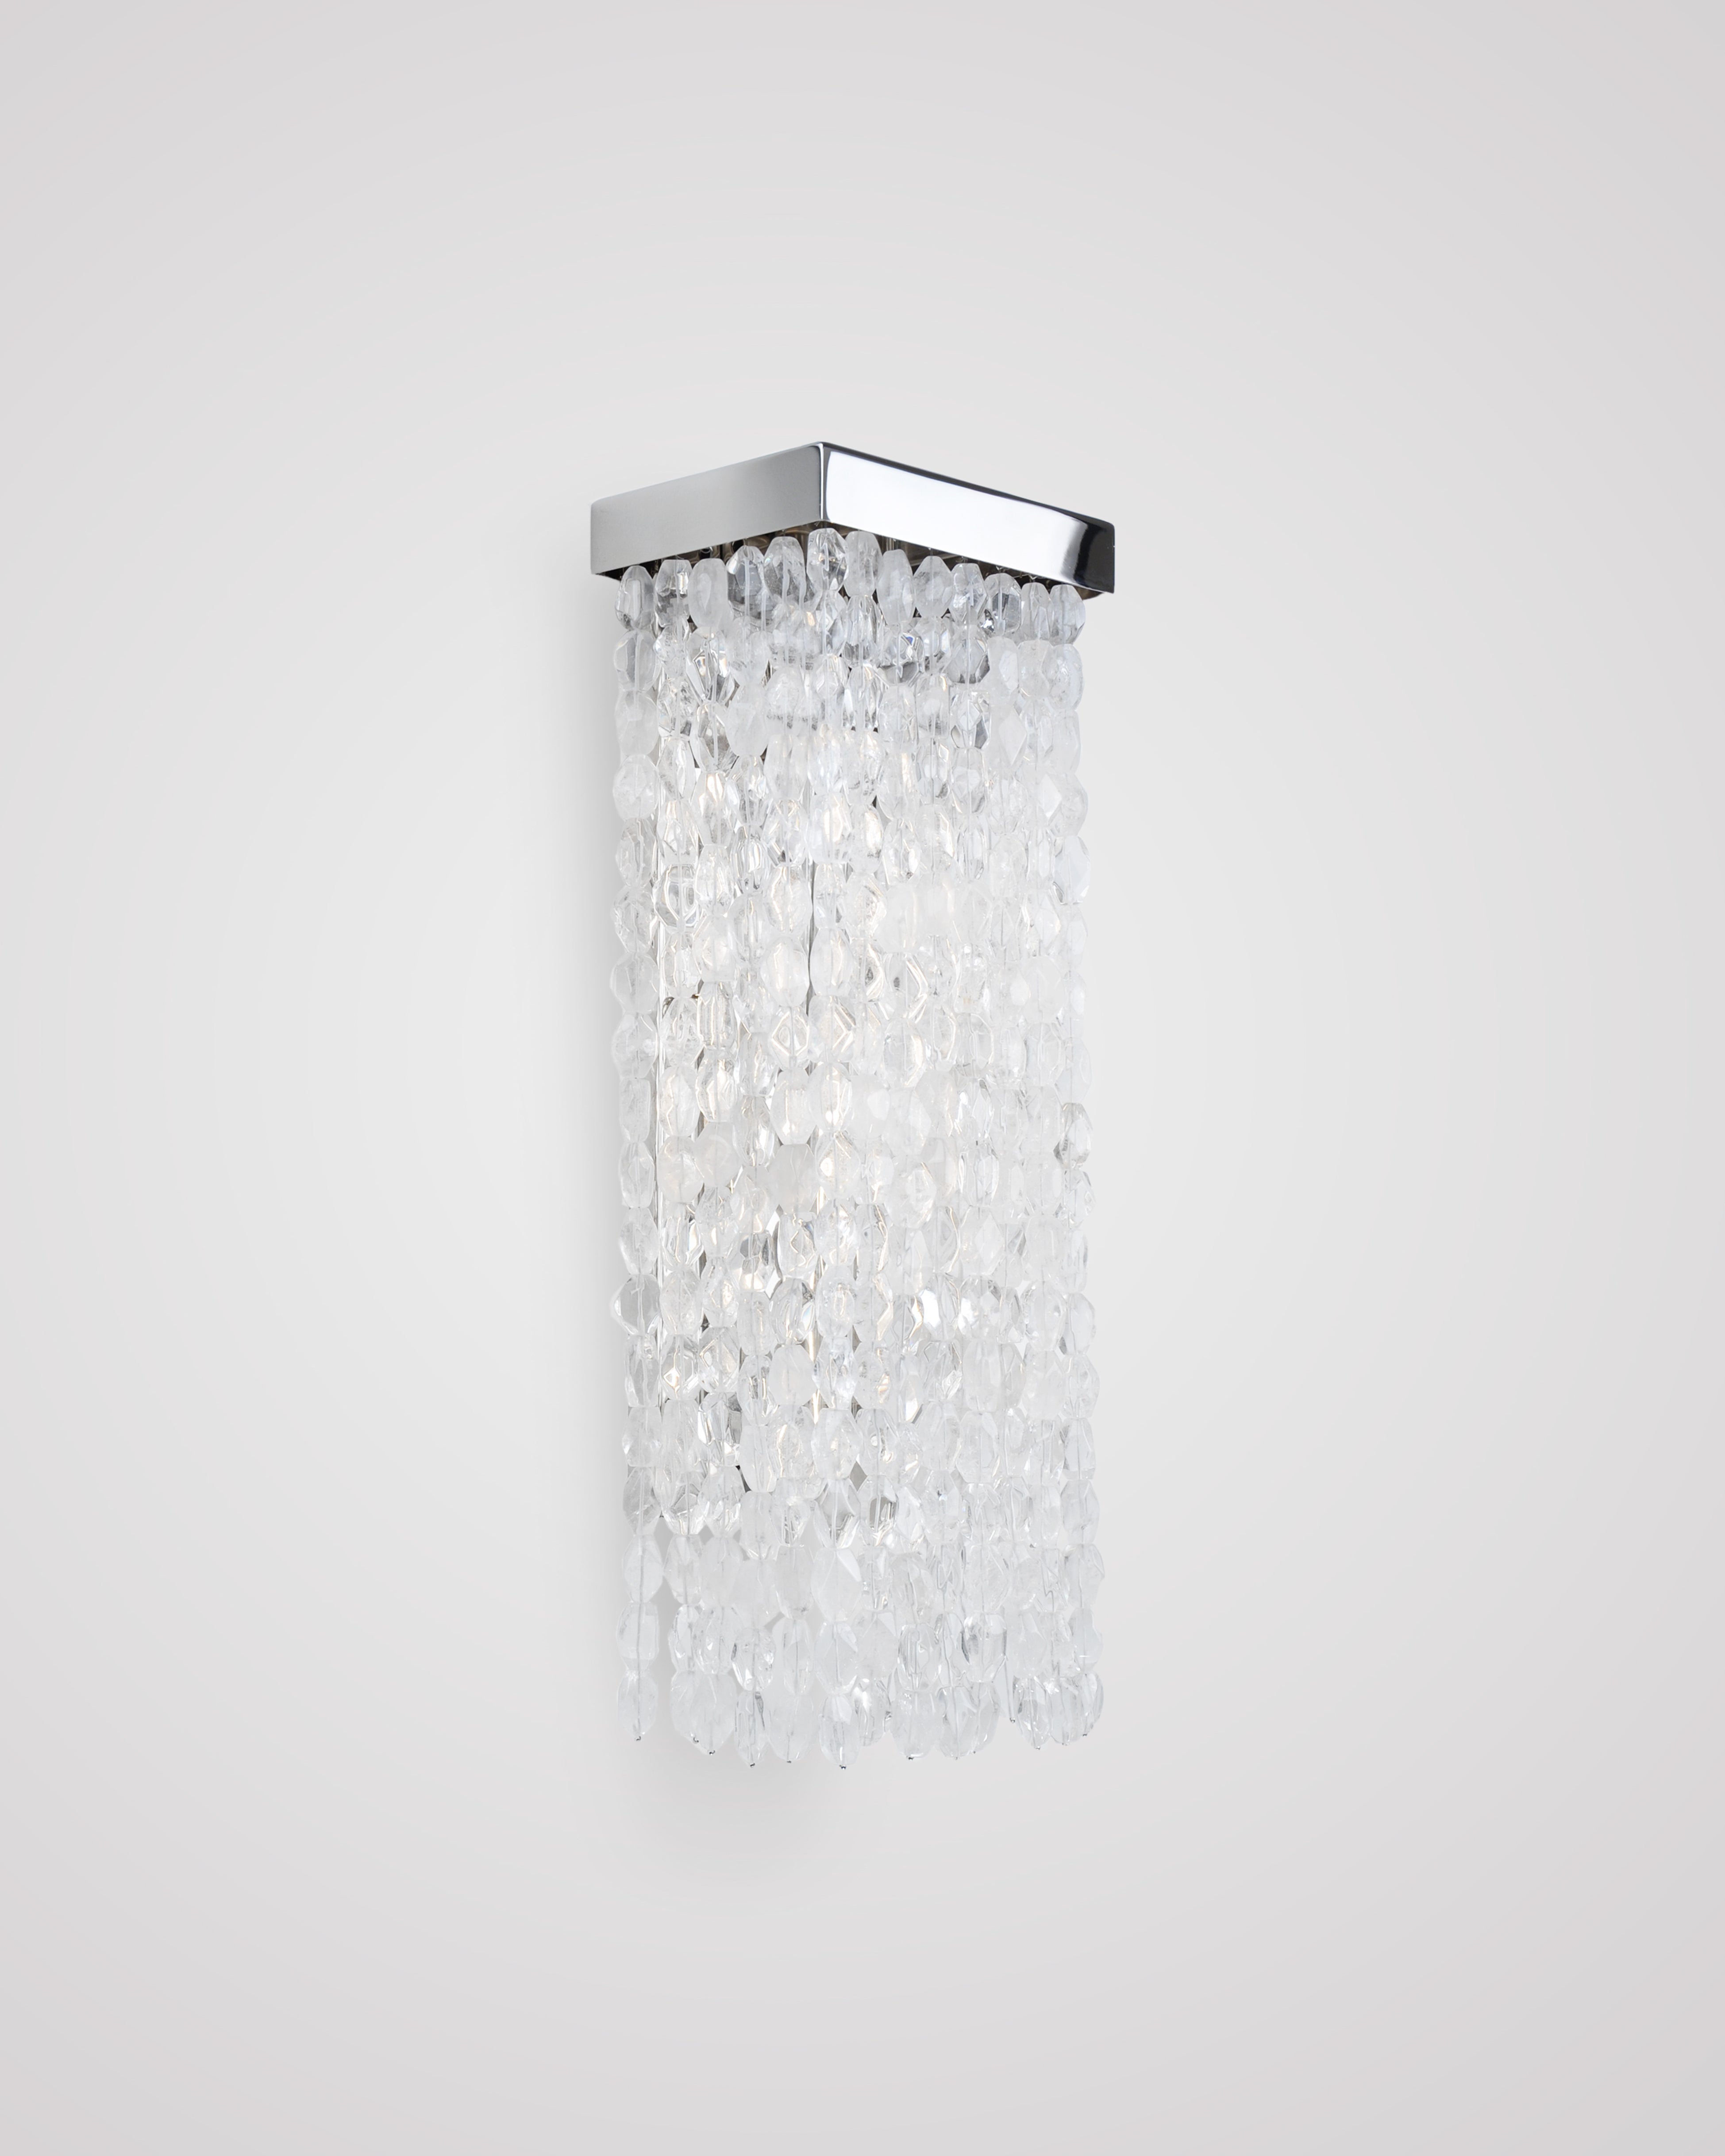 17 Inch Sconce in Polished Nickel with Large Clear Rock Crystal